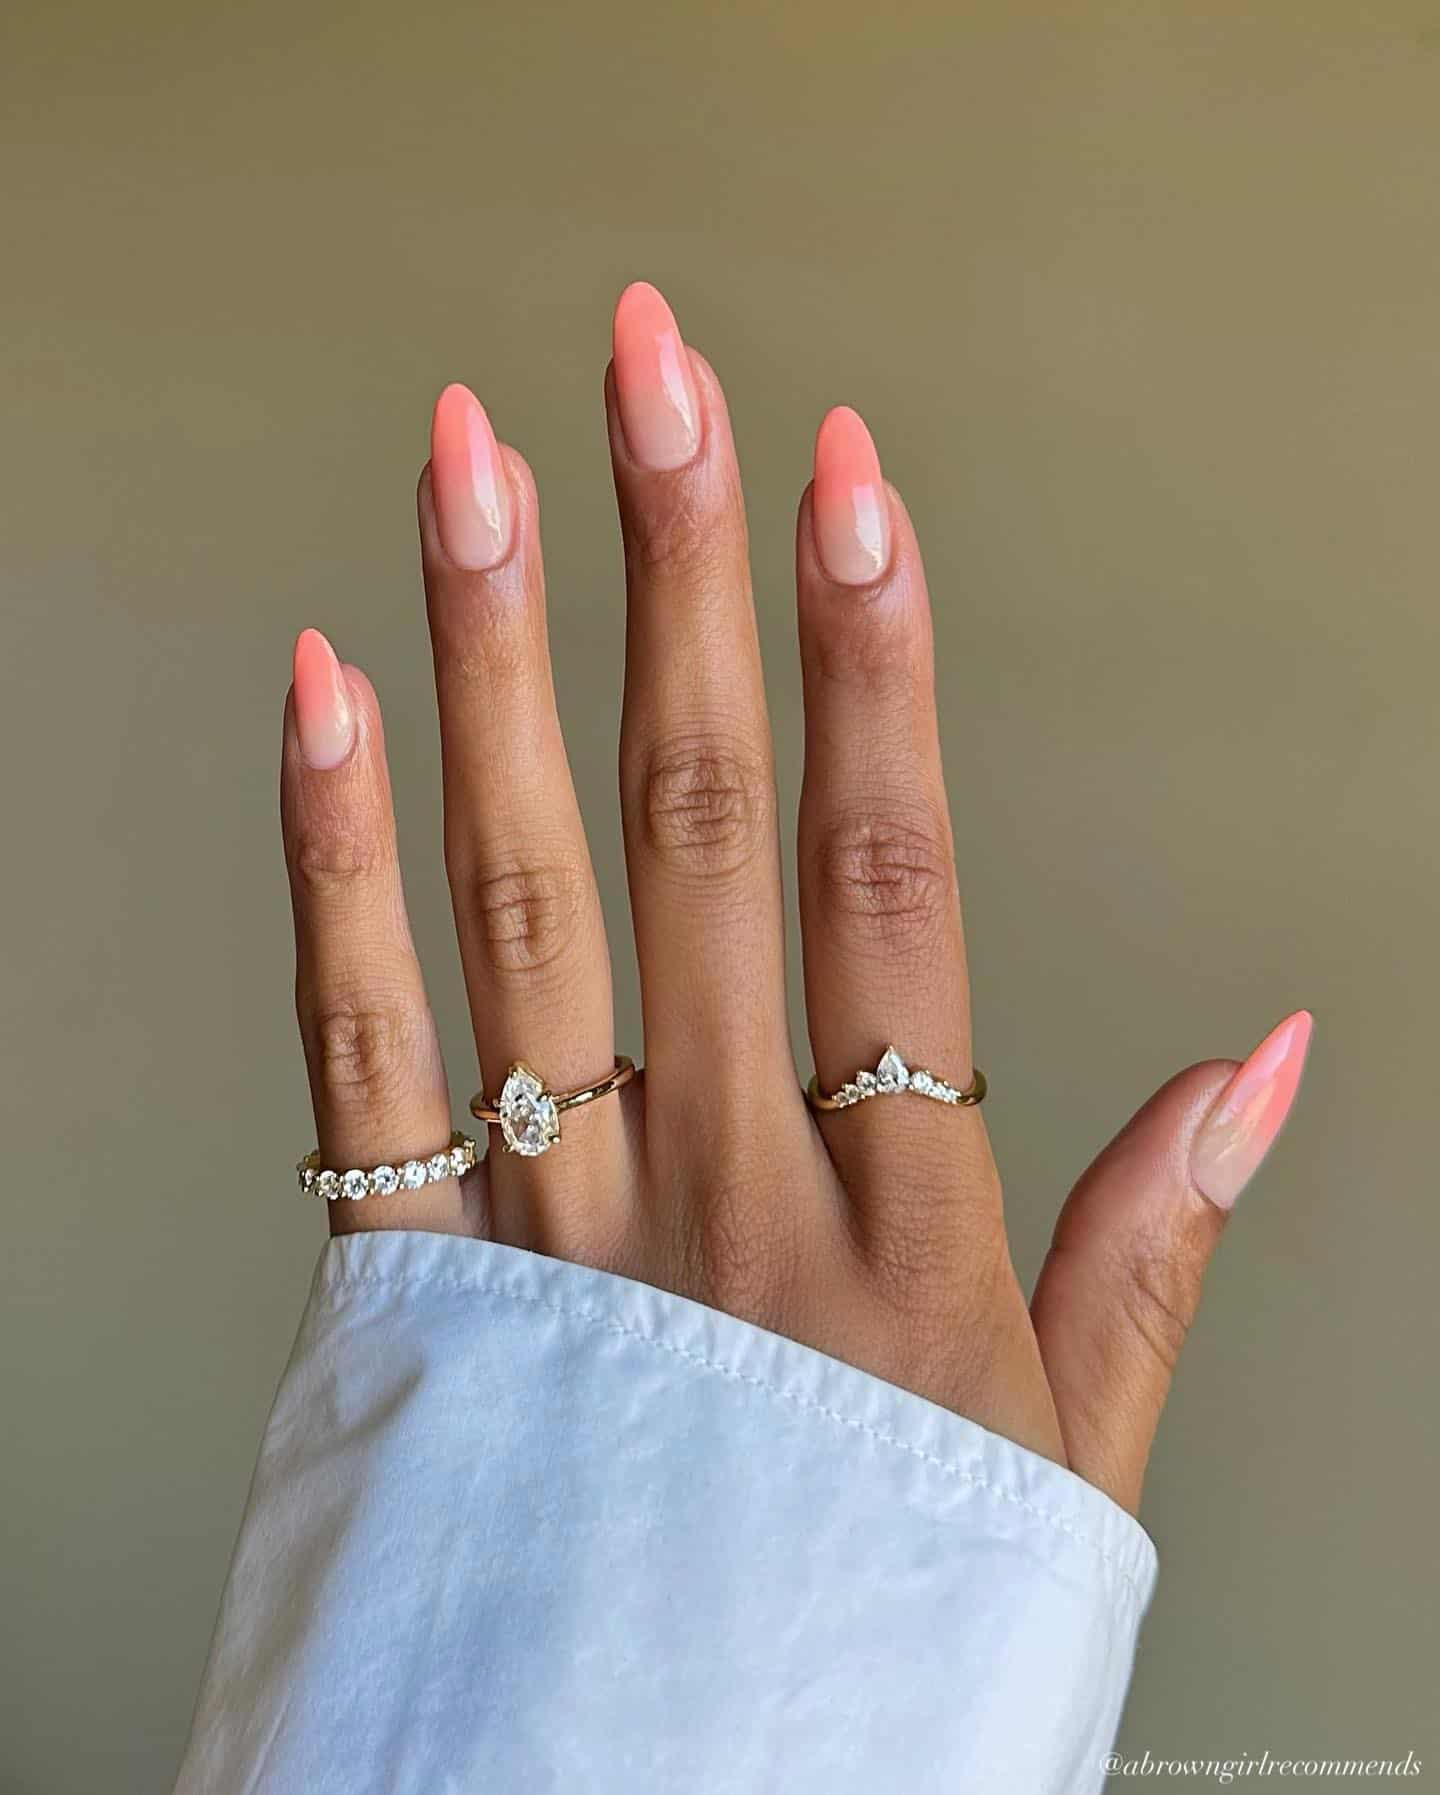 A hand with long round nails painted in a nude and coral peach ombre